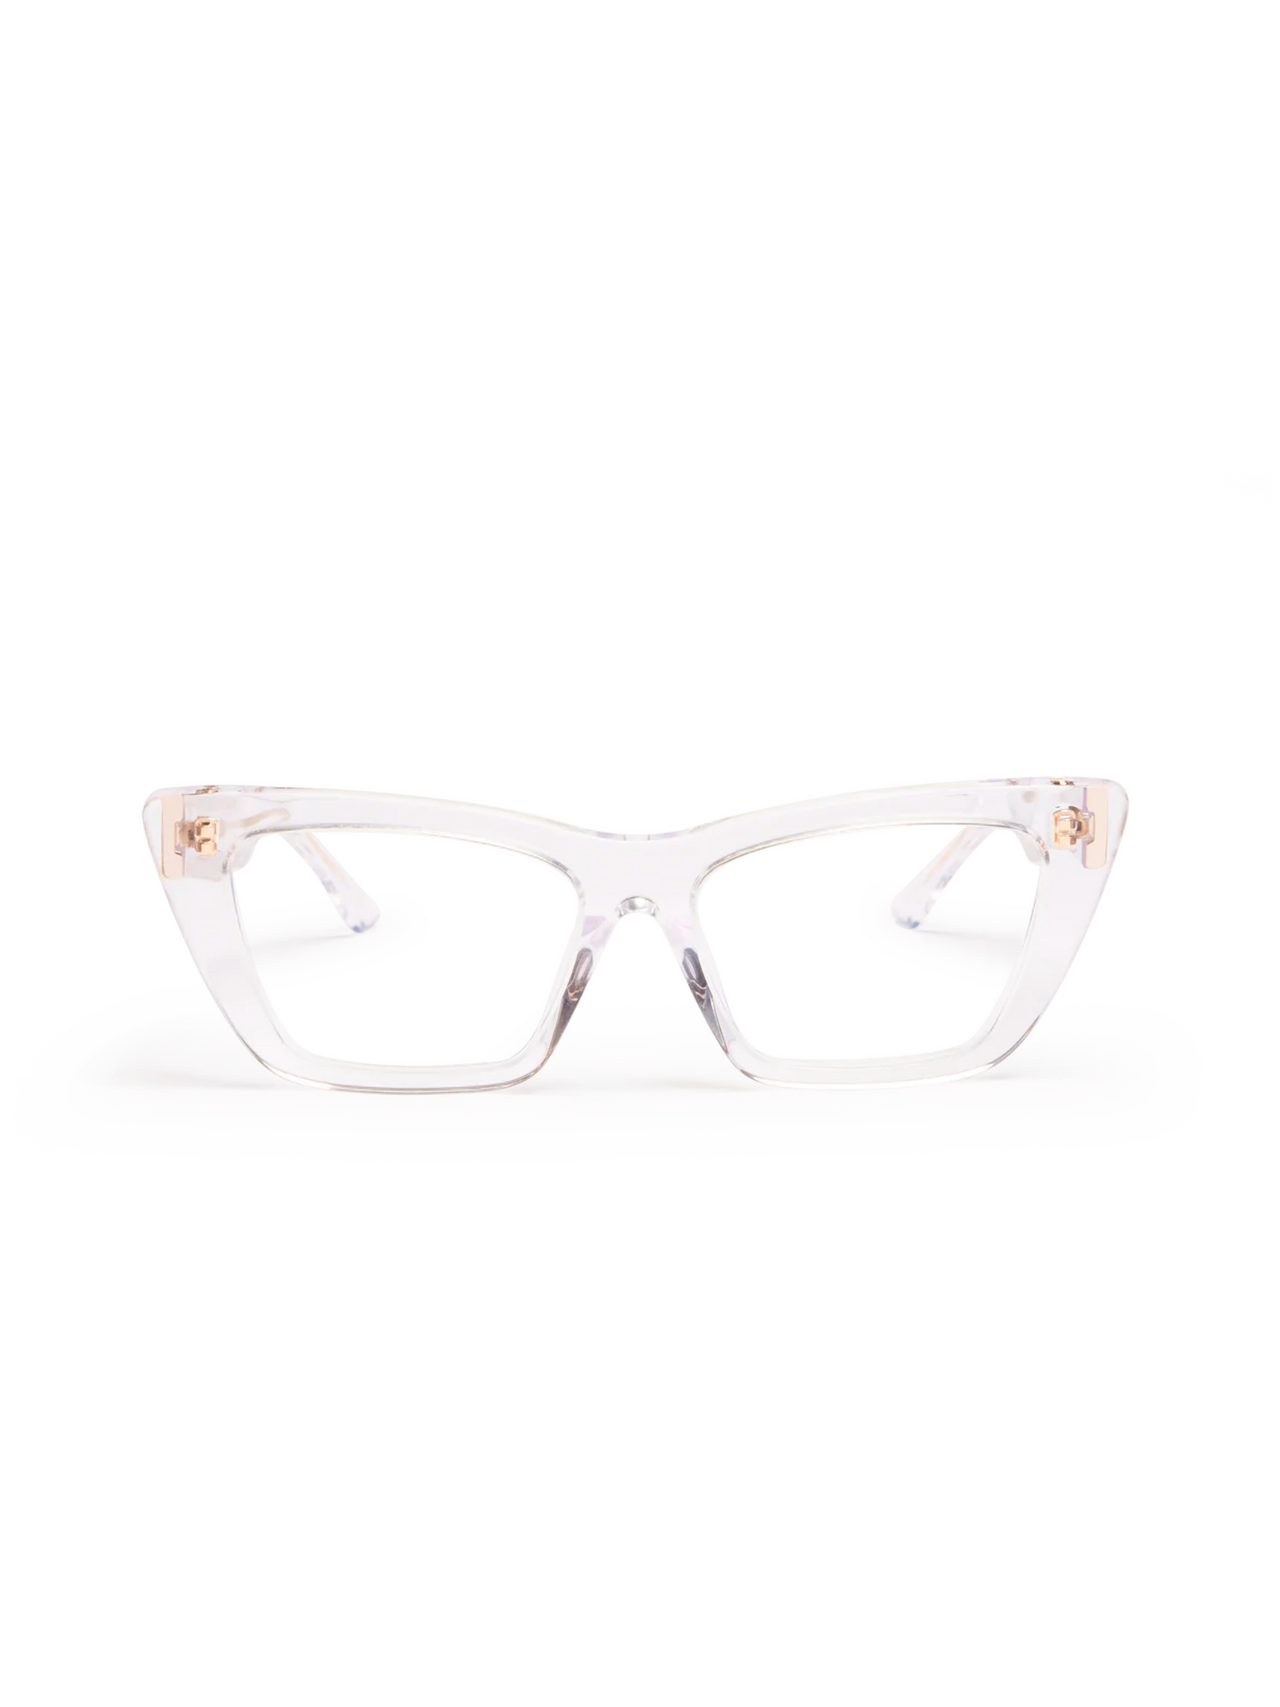 The Banks Blue Light Glasses Clear, Sunglass Acc by BANBE Eyewear | LIT Boutique